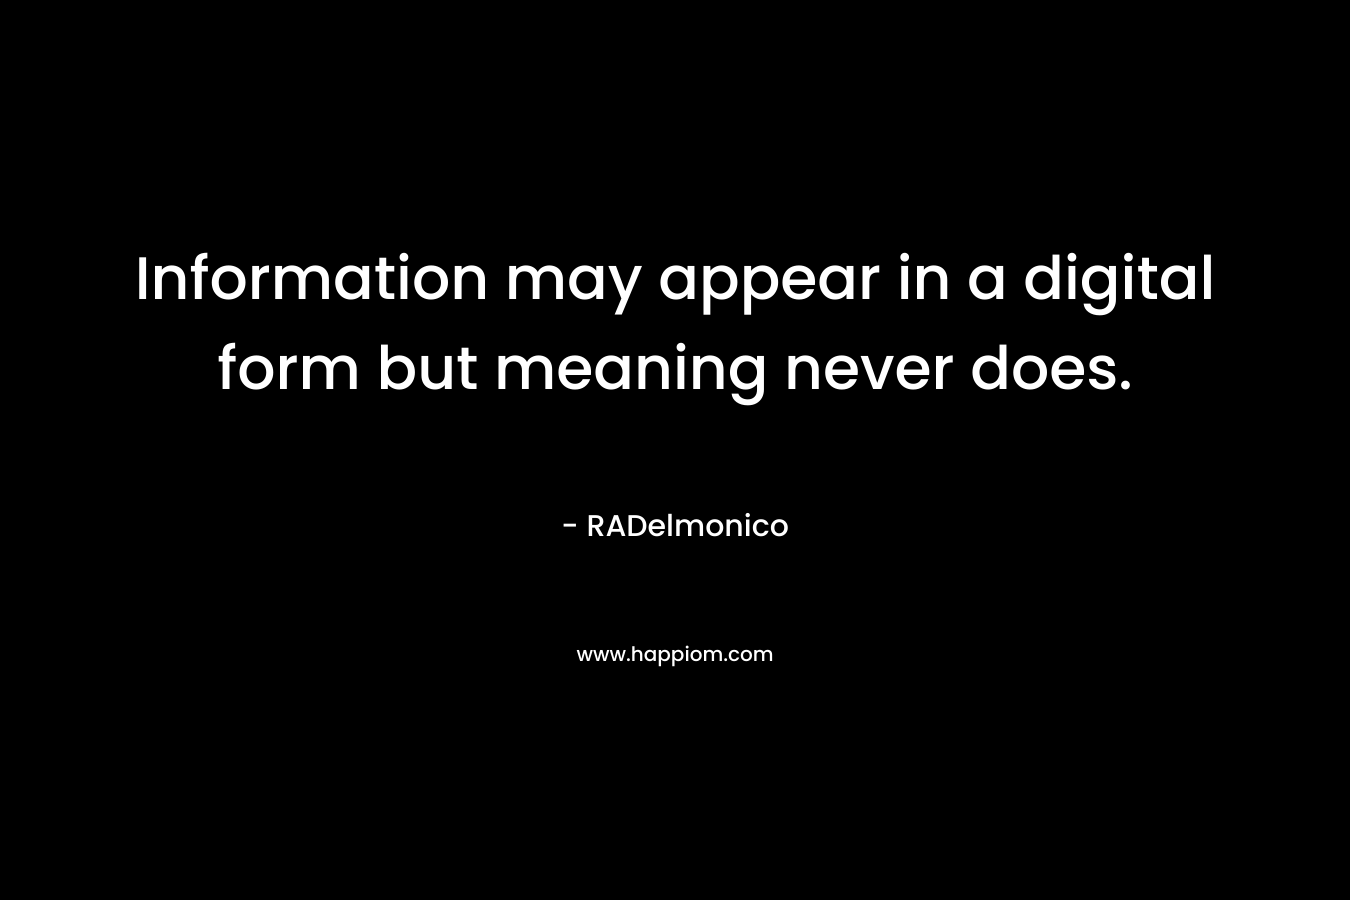 Information may appear in a digital form but meaning never does.